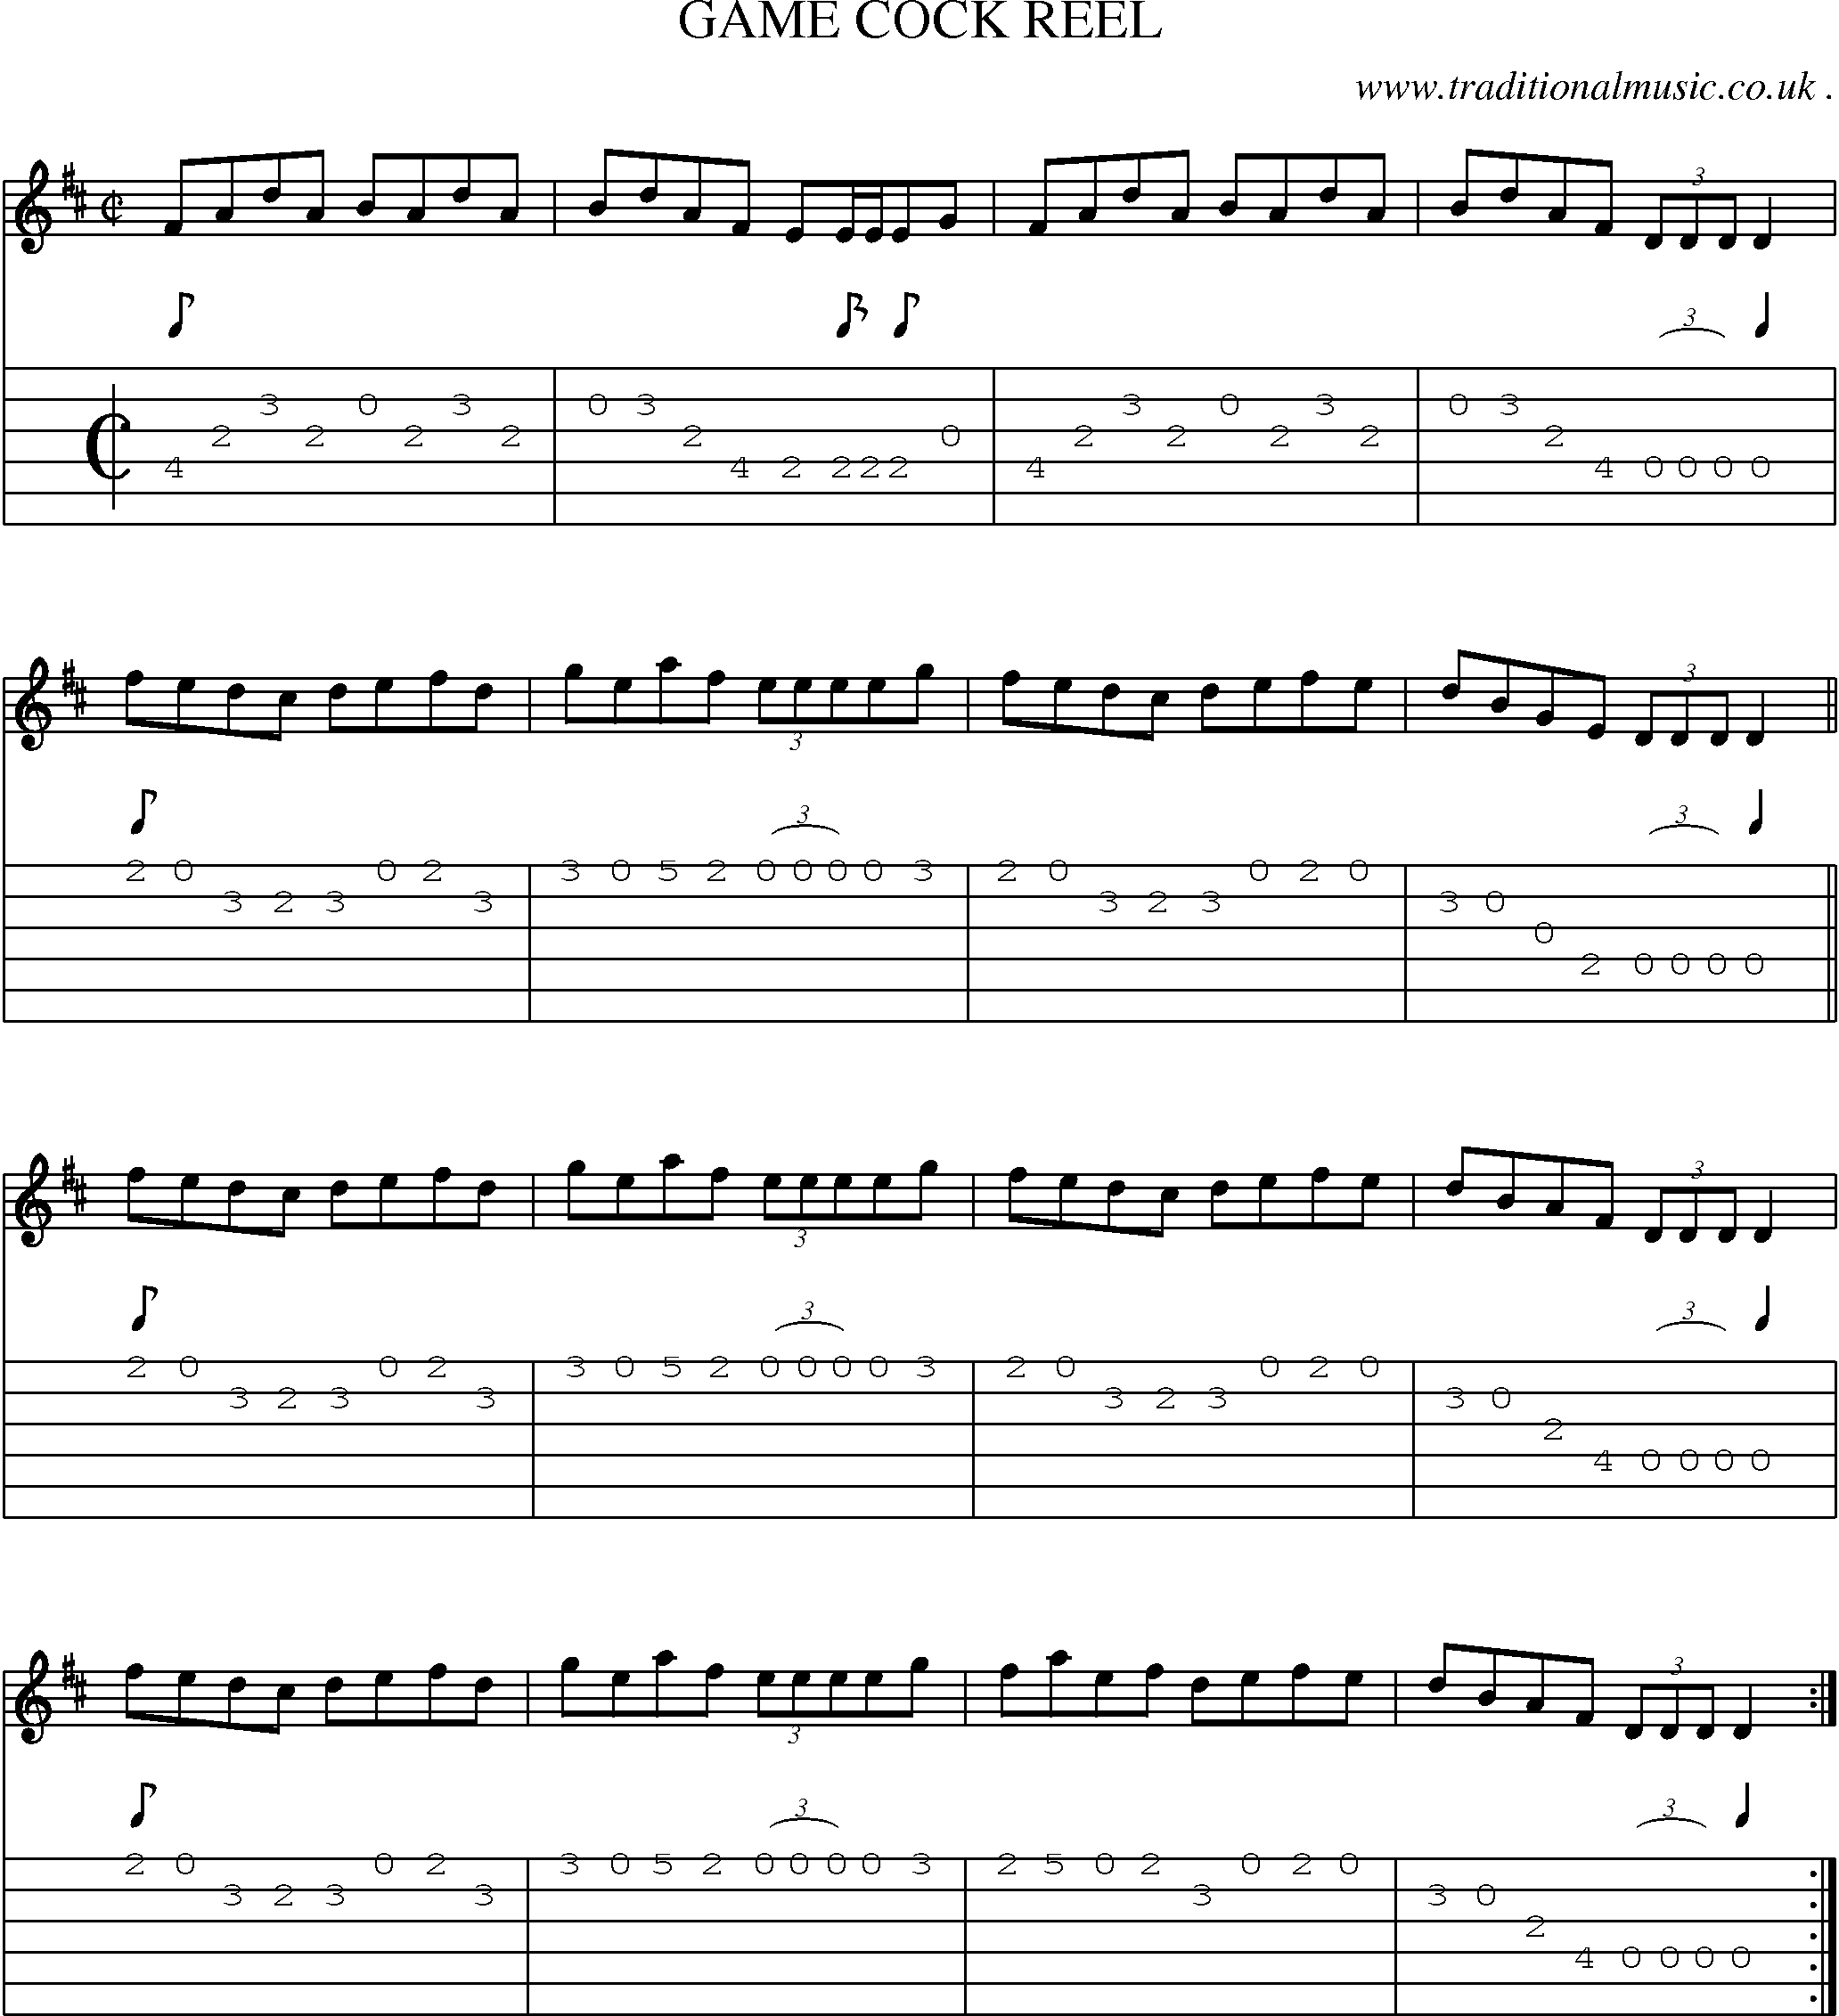 Sheet-Music and Guitar Tabs for Game Cock Reel